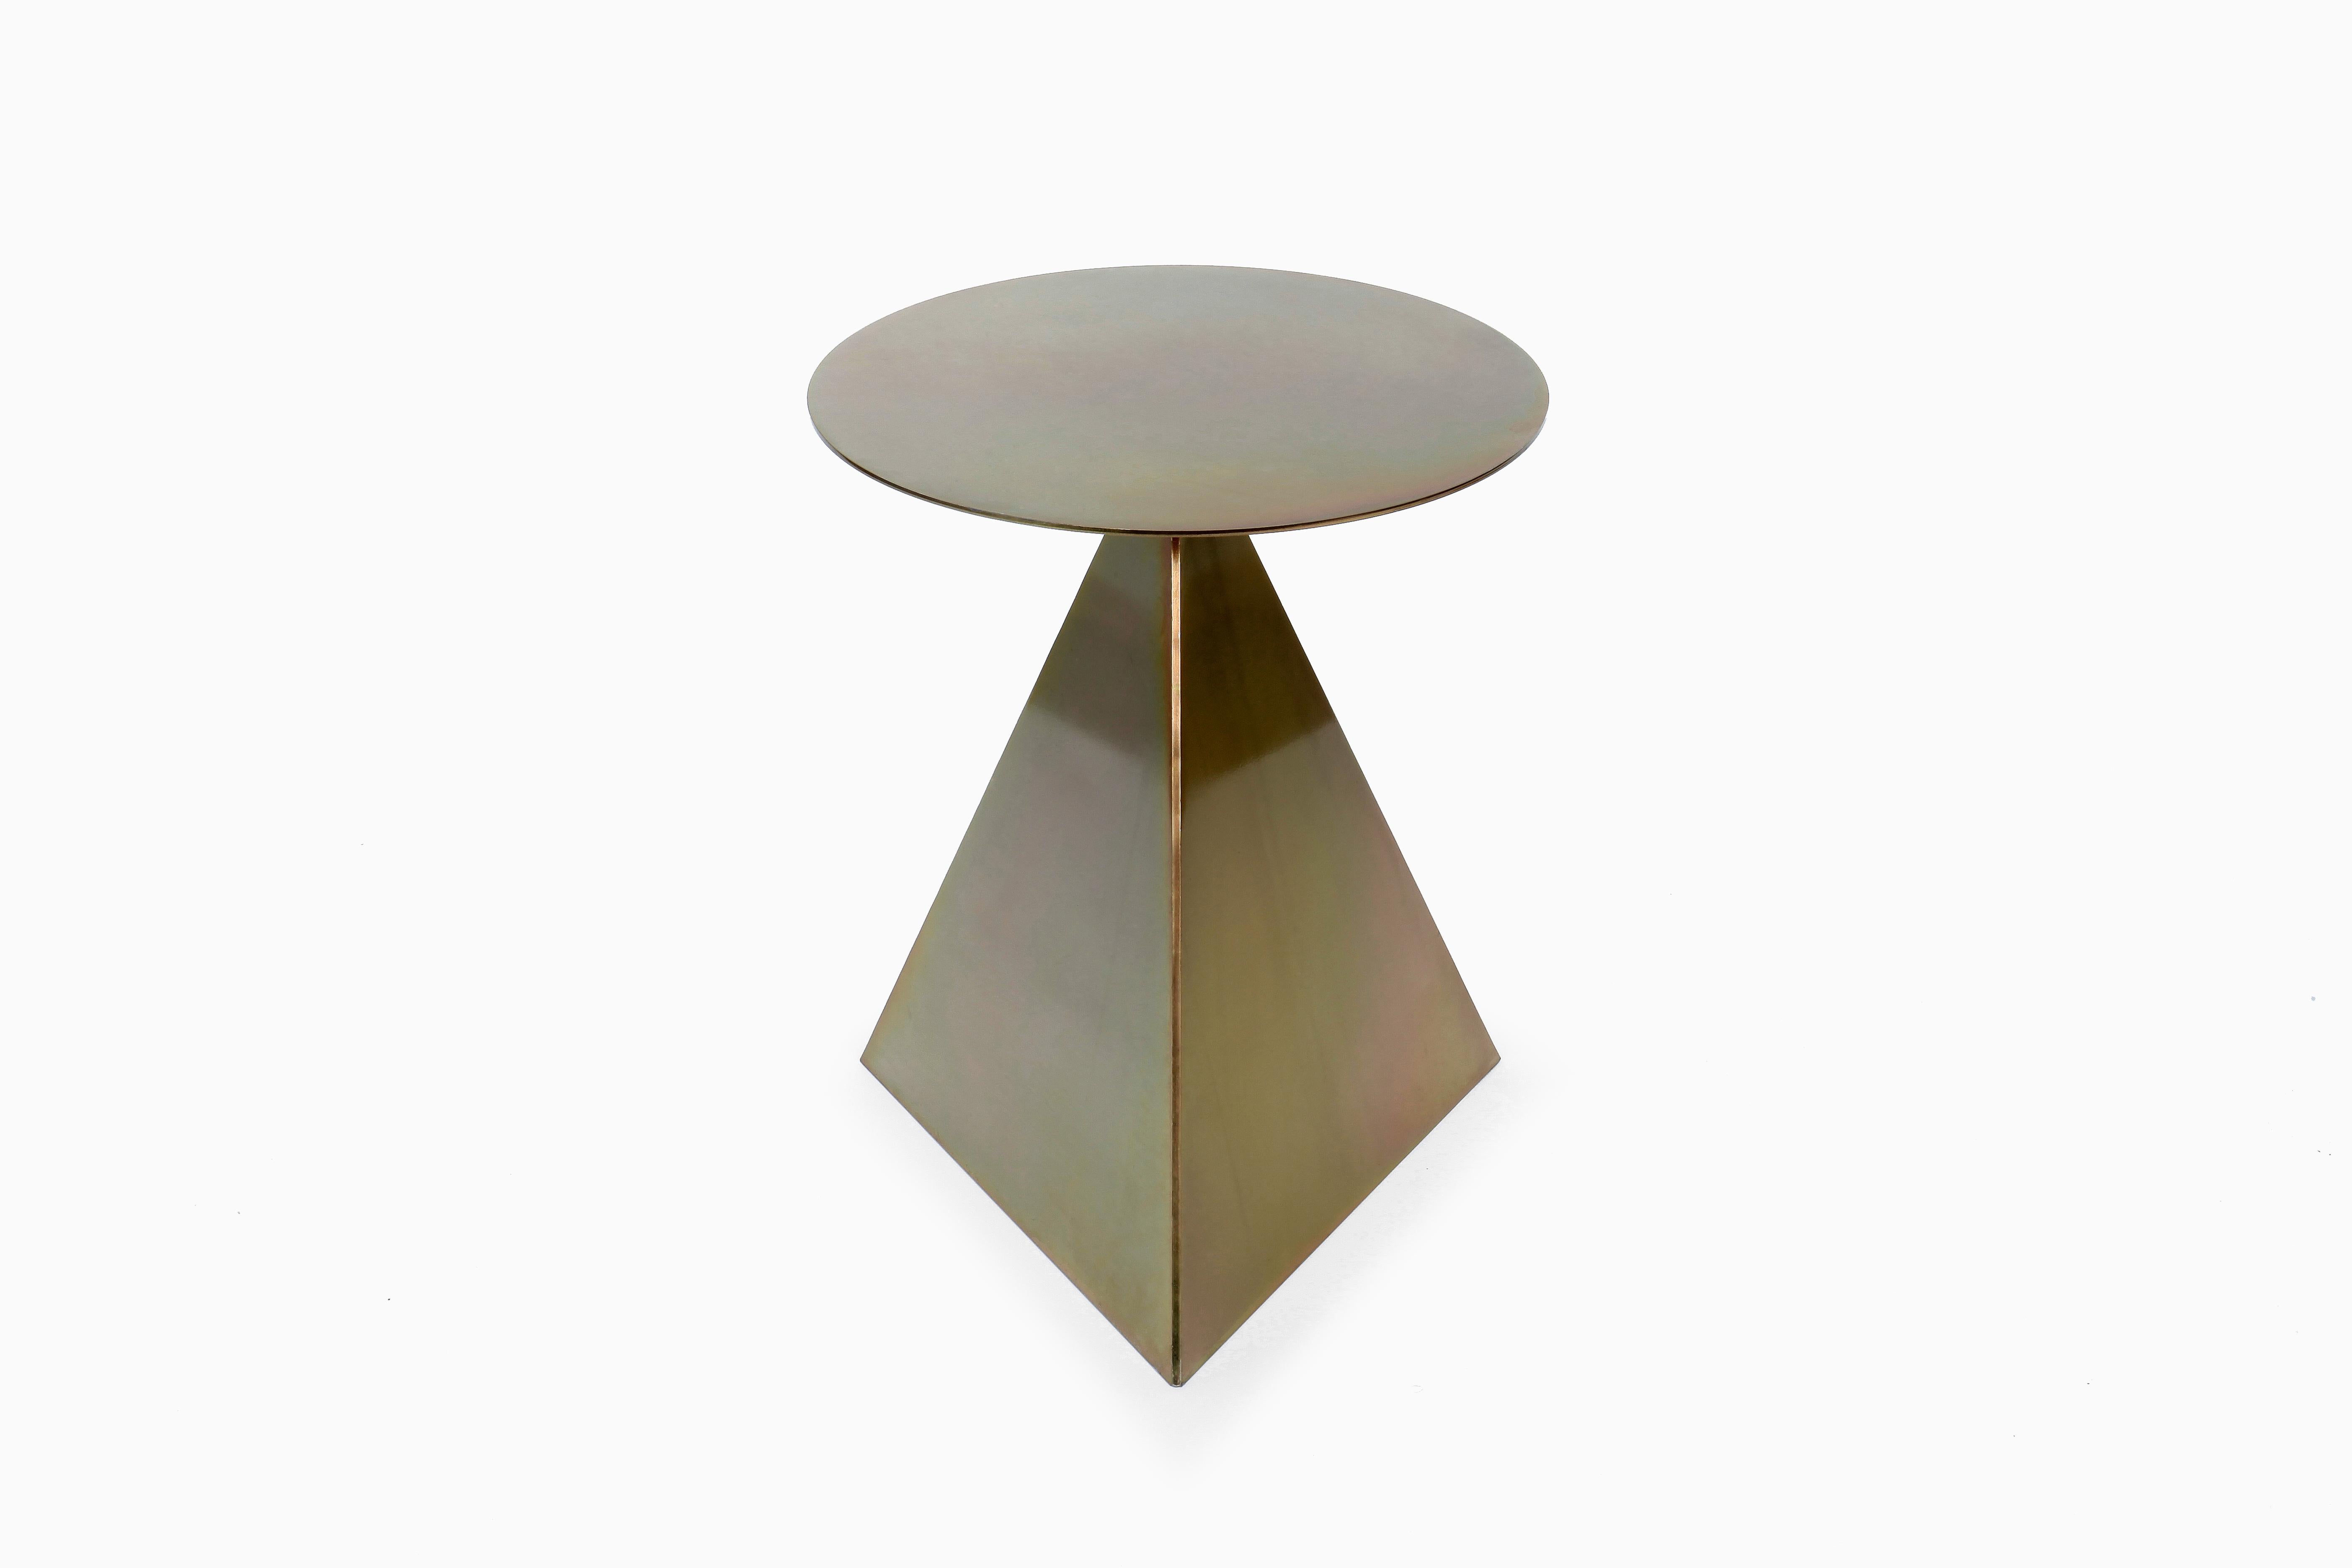 Difficult table is presented by Il lacions

The difficult table is an unfinished struggle to achieve an iridescent finish for a side table. The magic of the bichromated iron is diluted when varnished in all possible ways. But nonetheless, the